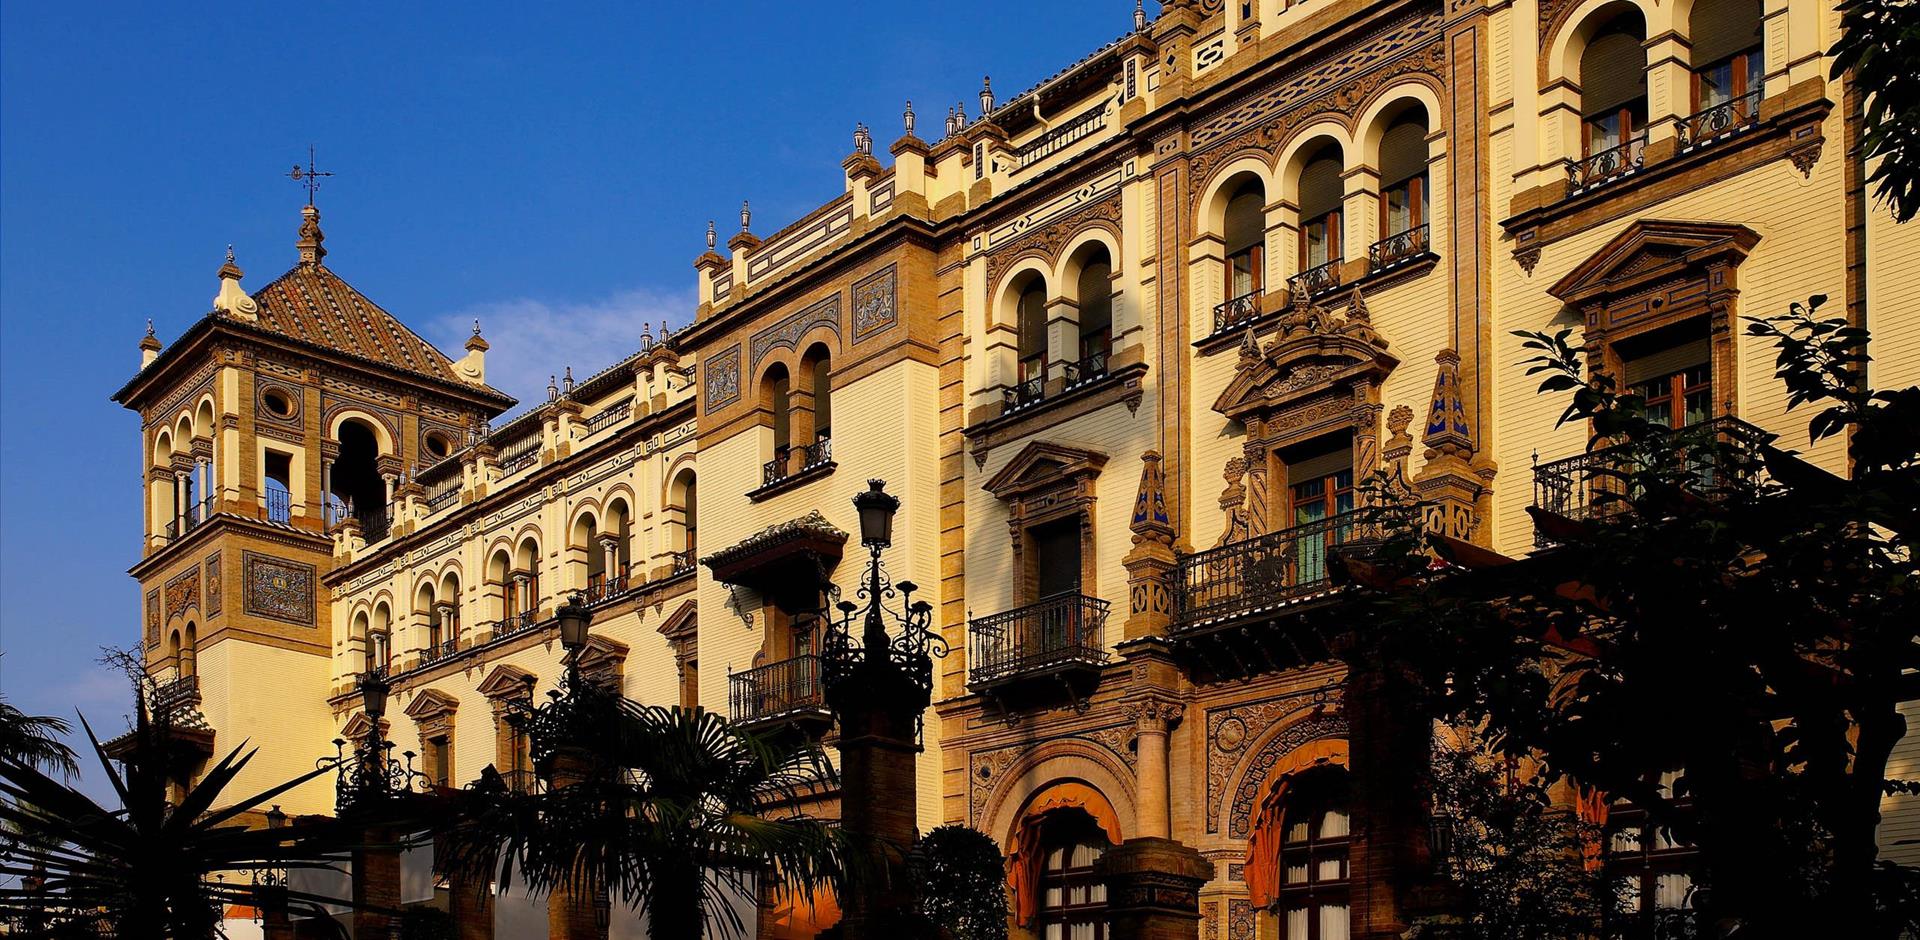 Hotel Alfonso XIII, Seville